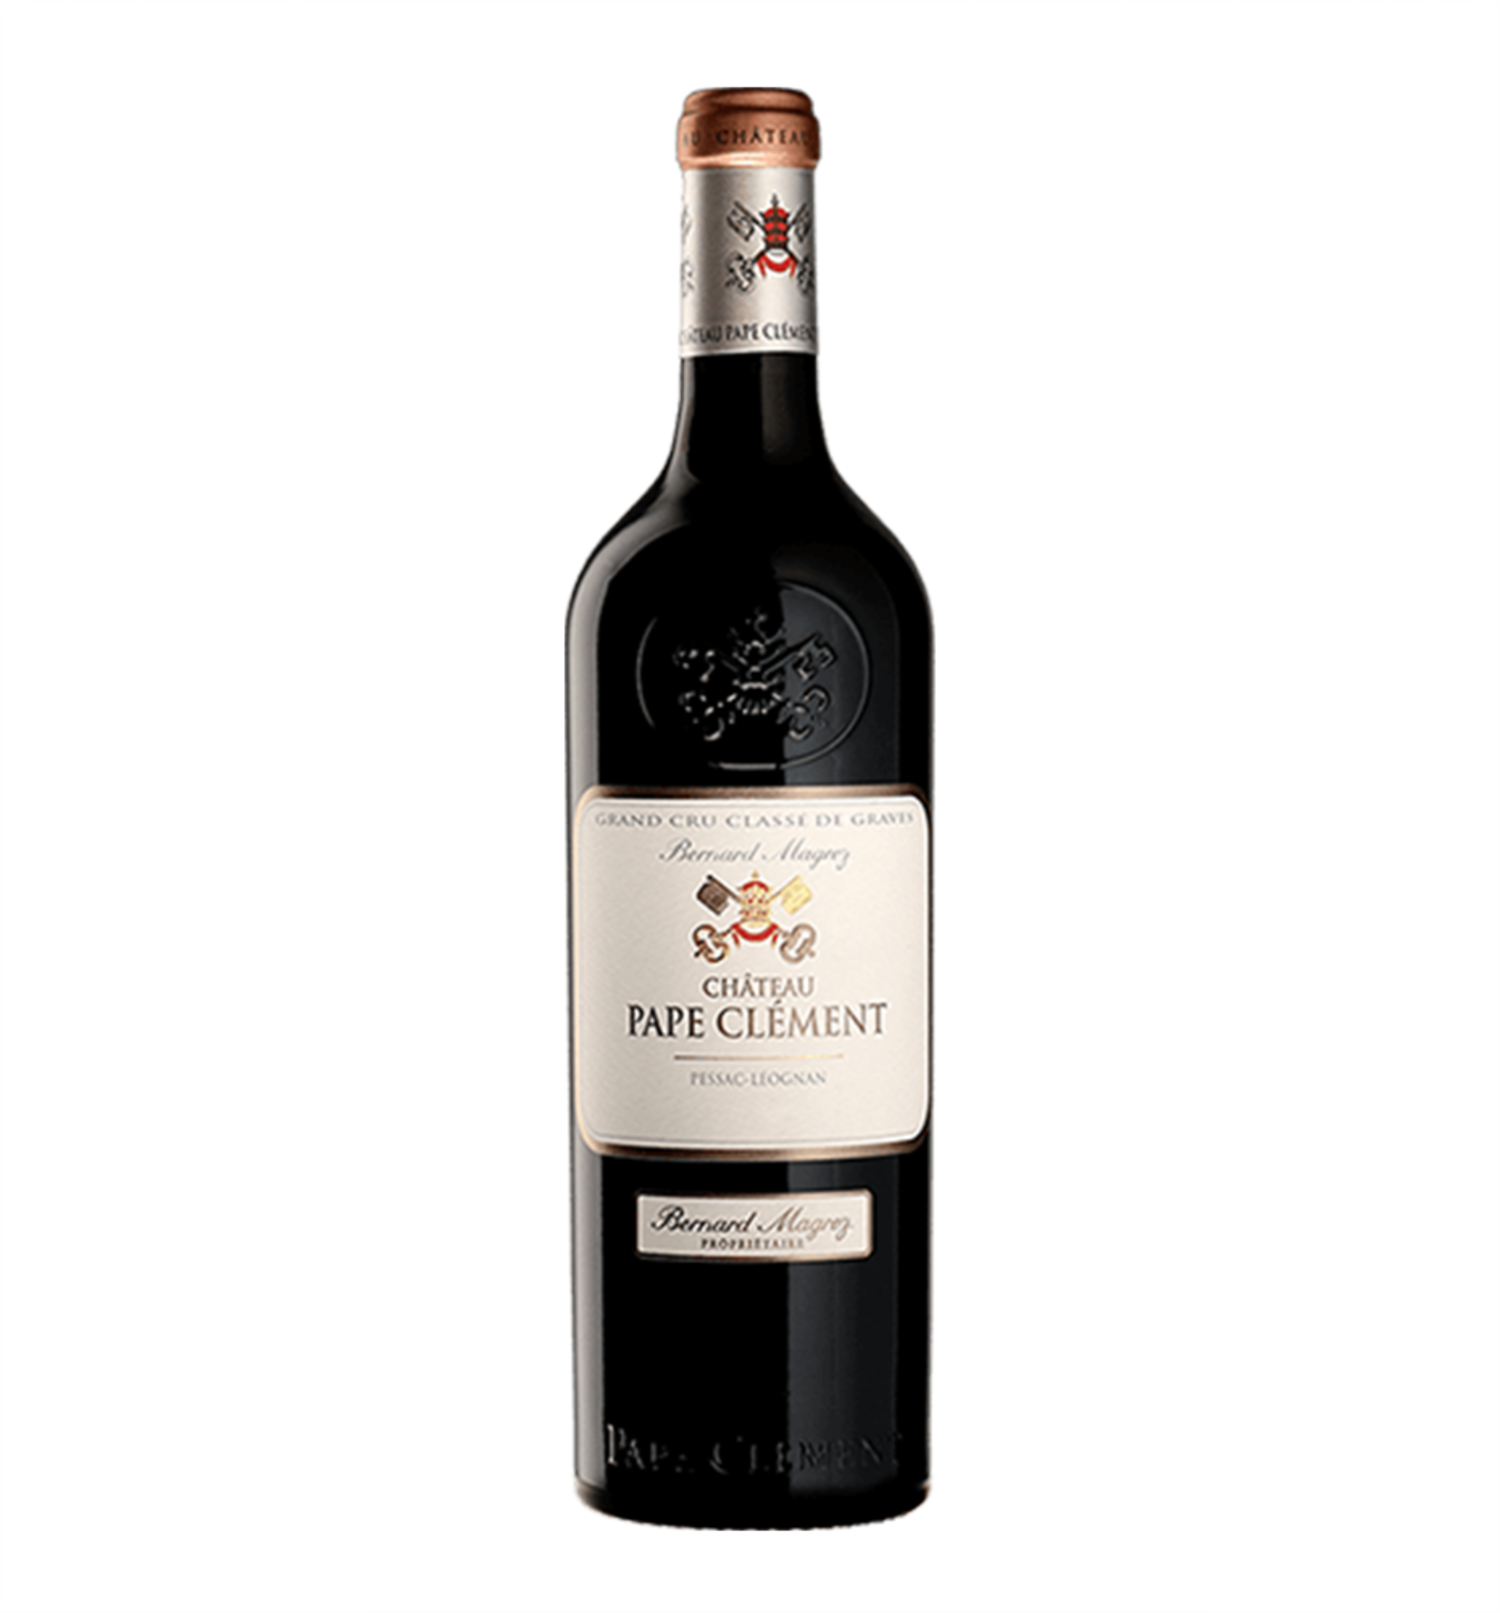 Clementin de Pape Clement Red Wine 2018 $105 - Uncle Fossil